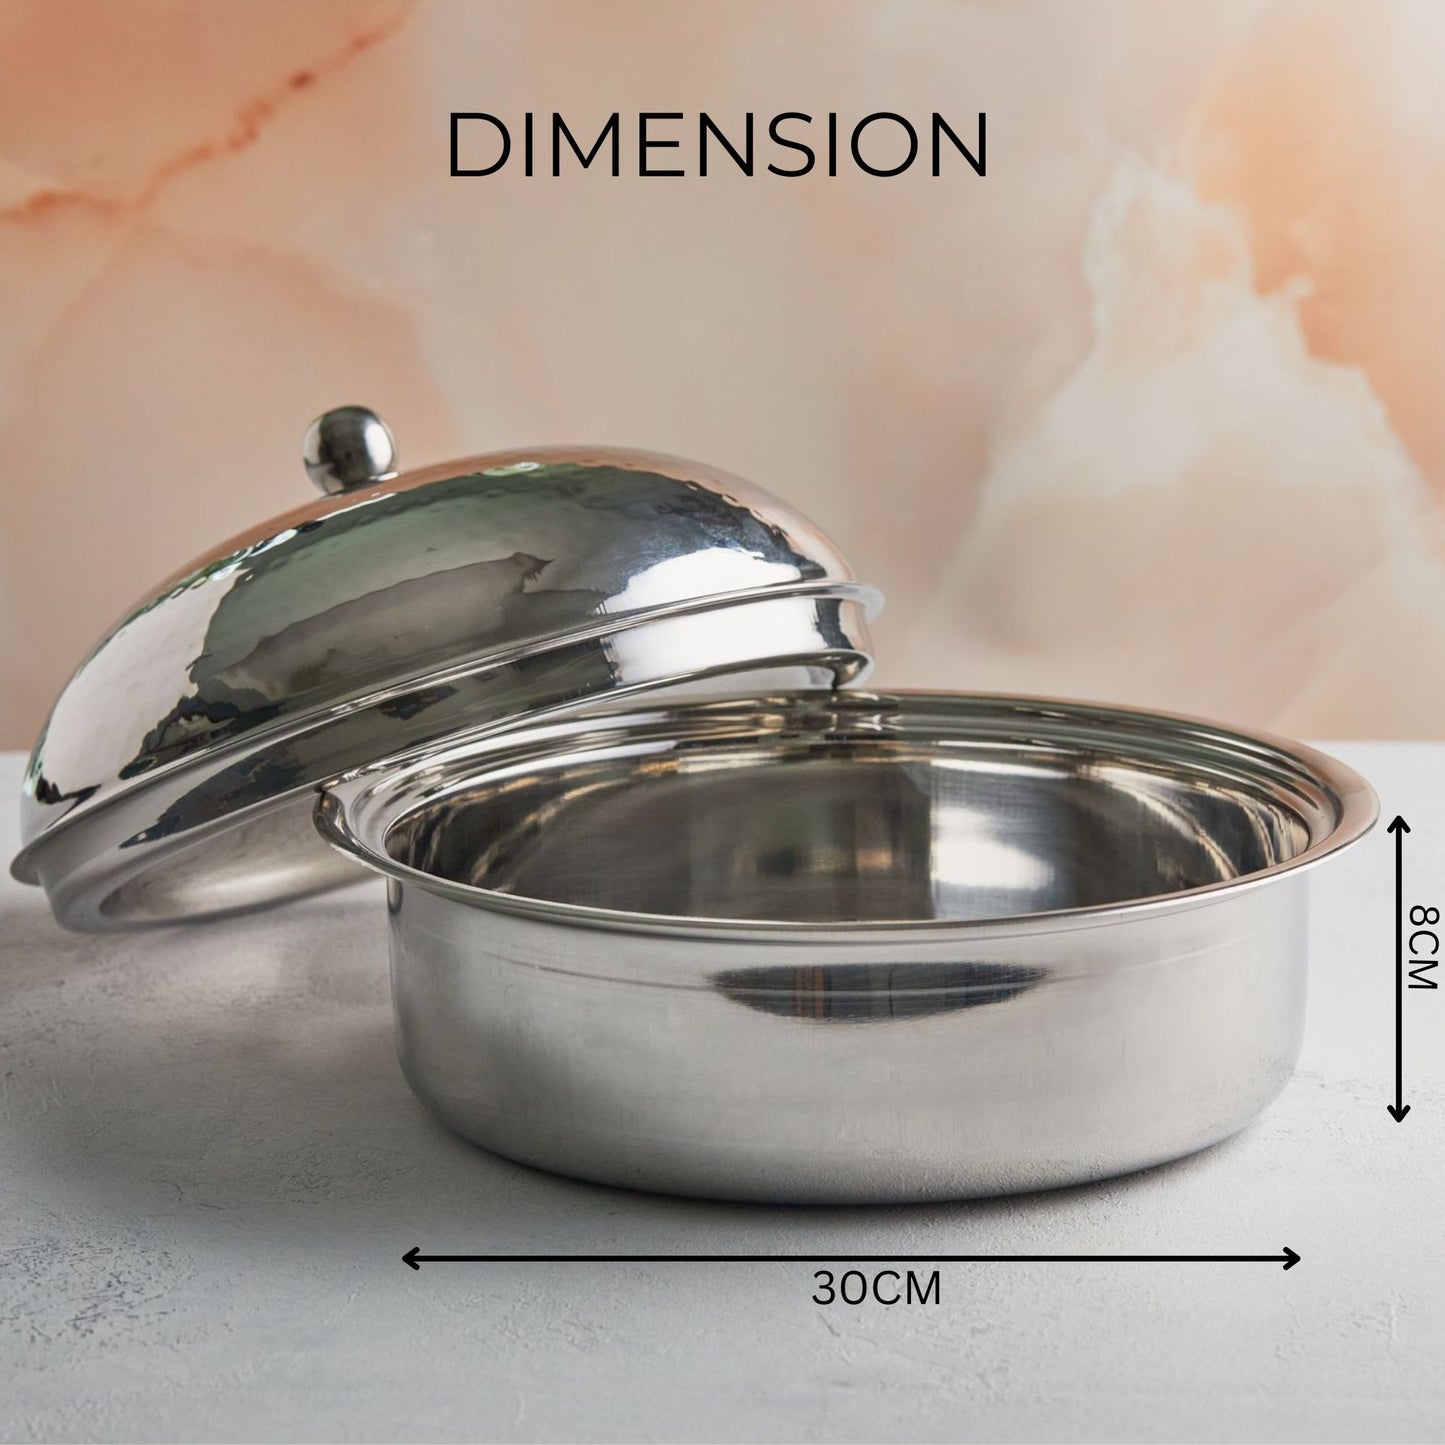 Handcrafted Premium Mother of Pearl with Insulated Stainless Steel Casserole 3.5L